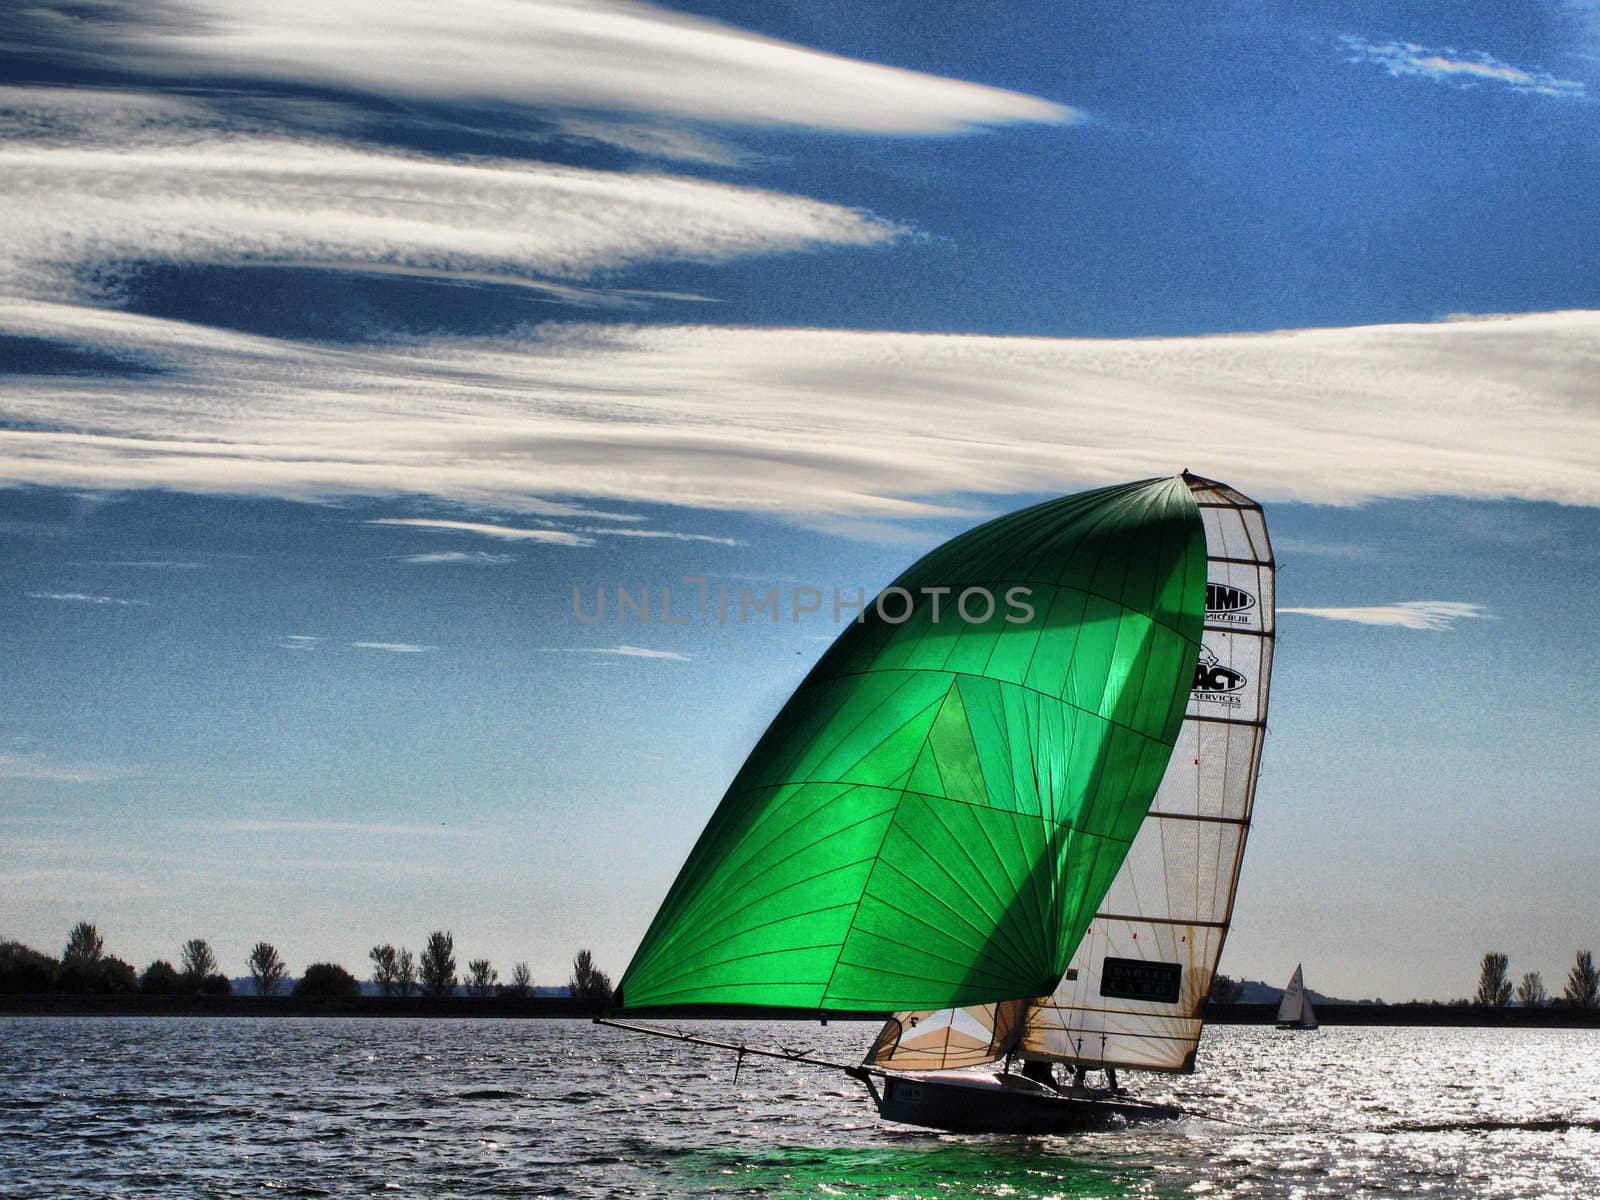 A boat with a green spinnaker sailing on Draycote Water